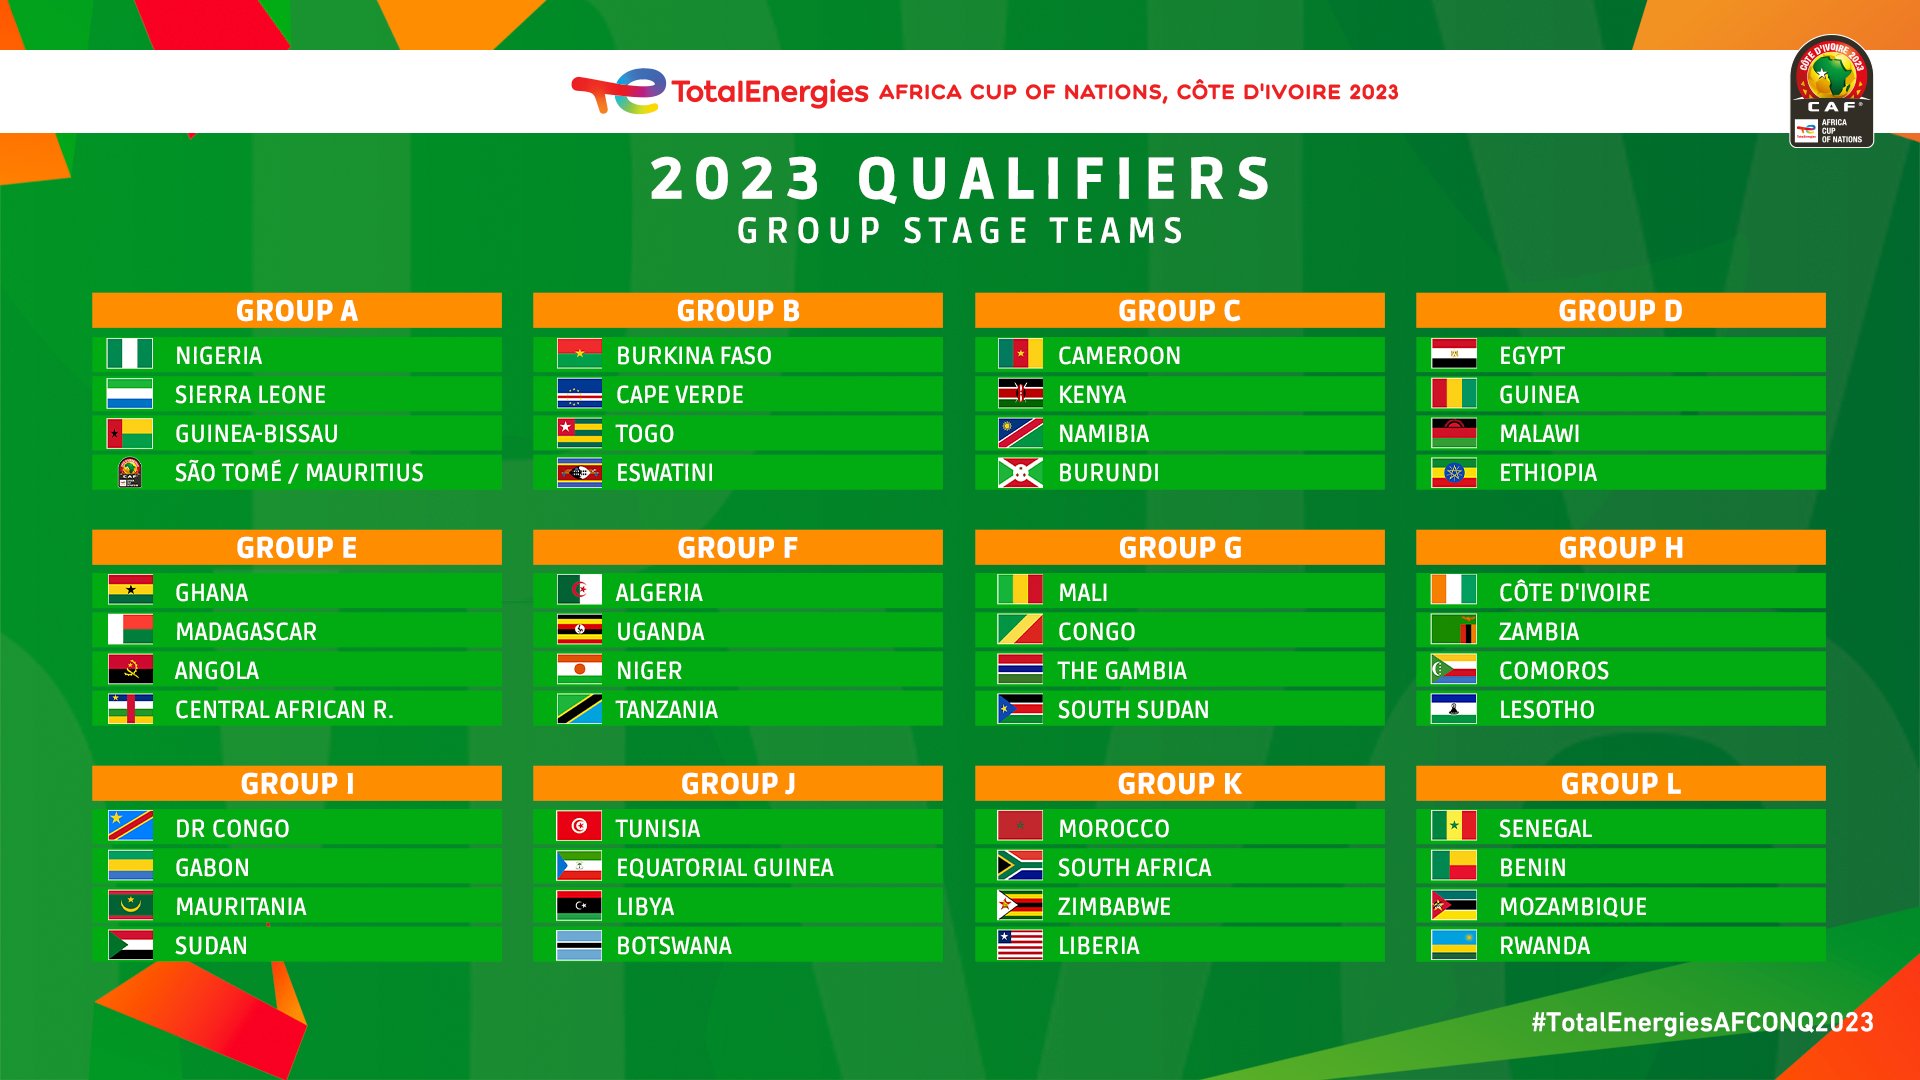 AFCON 2023 Qualifiers: Ghana handed tricky draw - The Ghana Guardian News